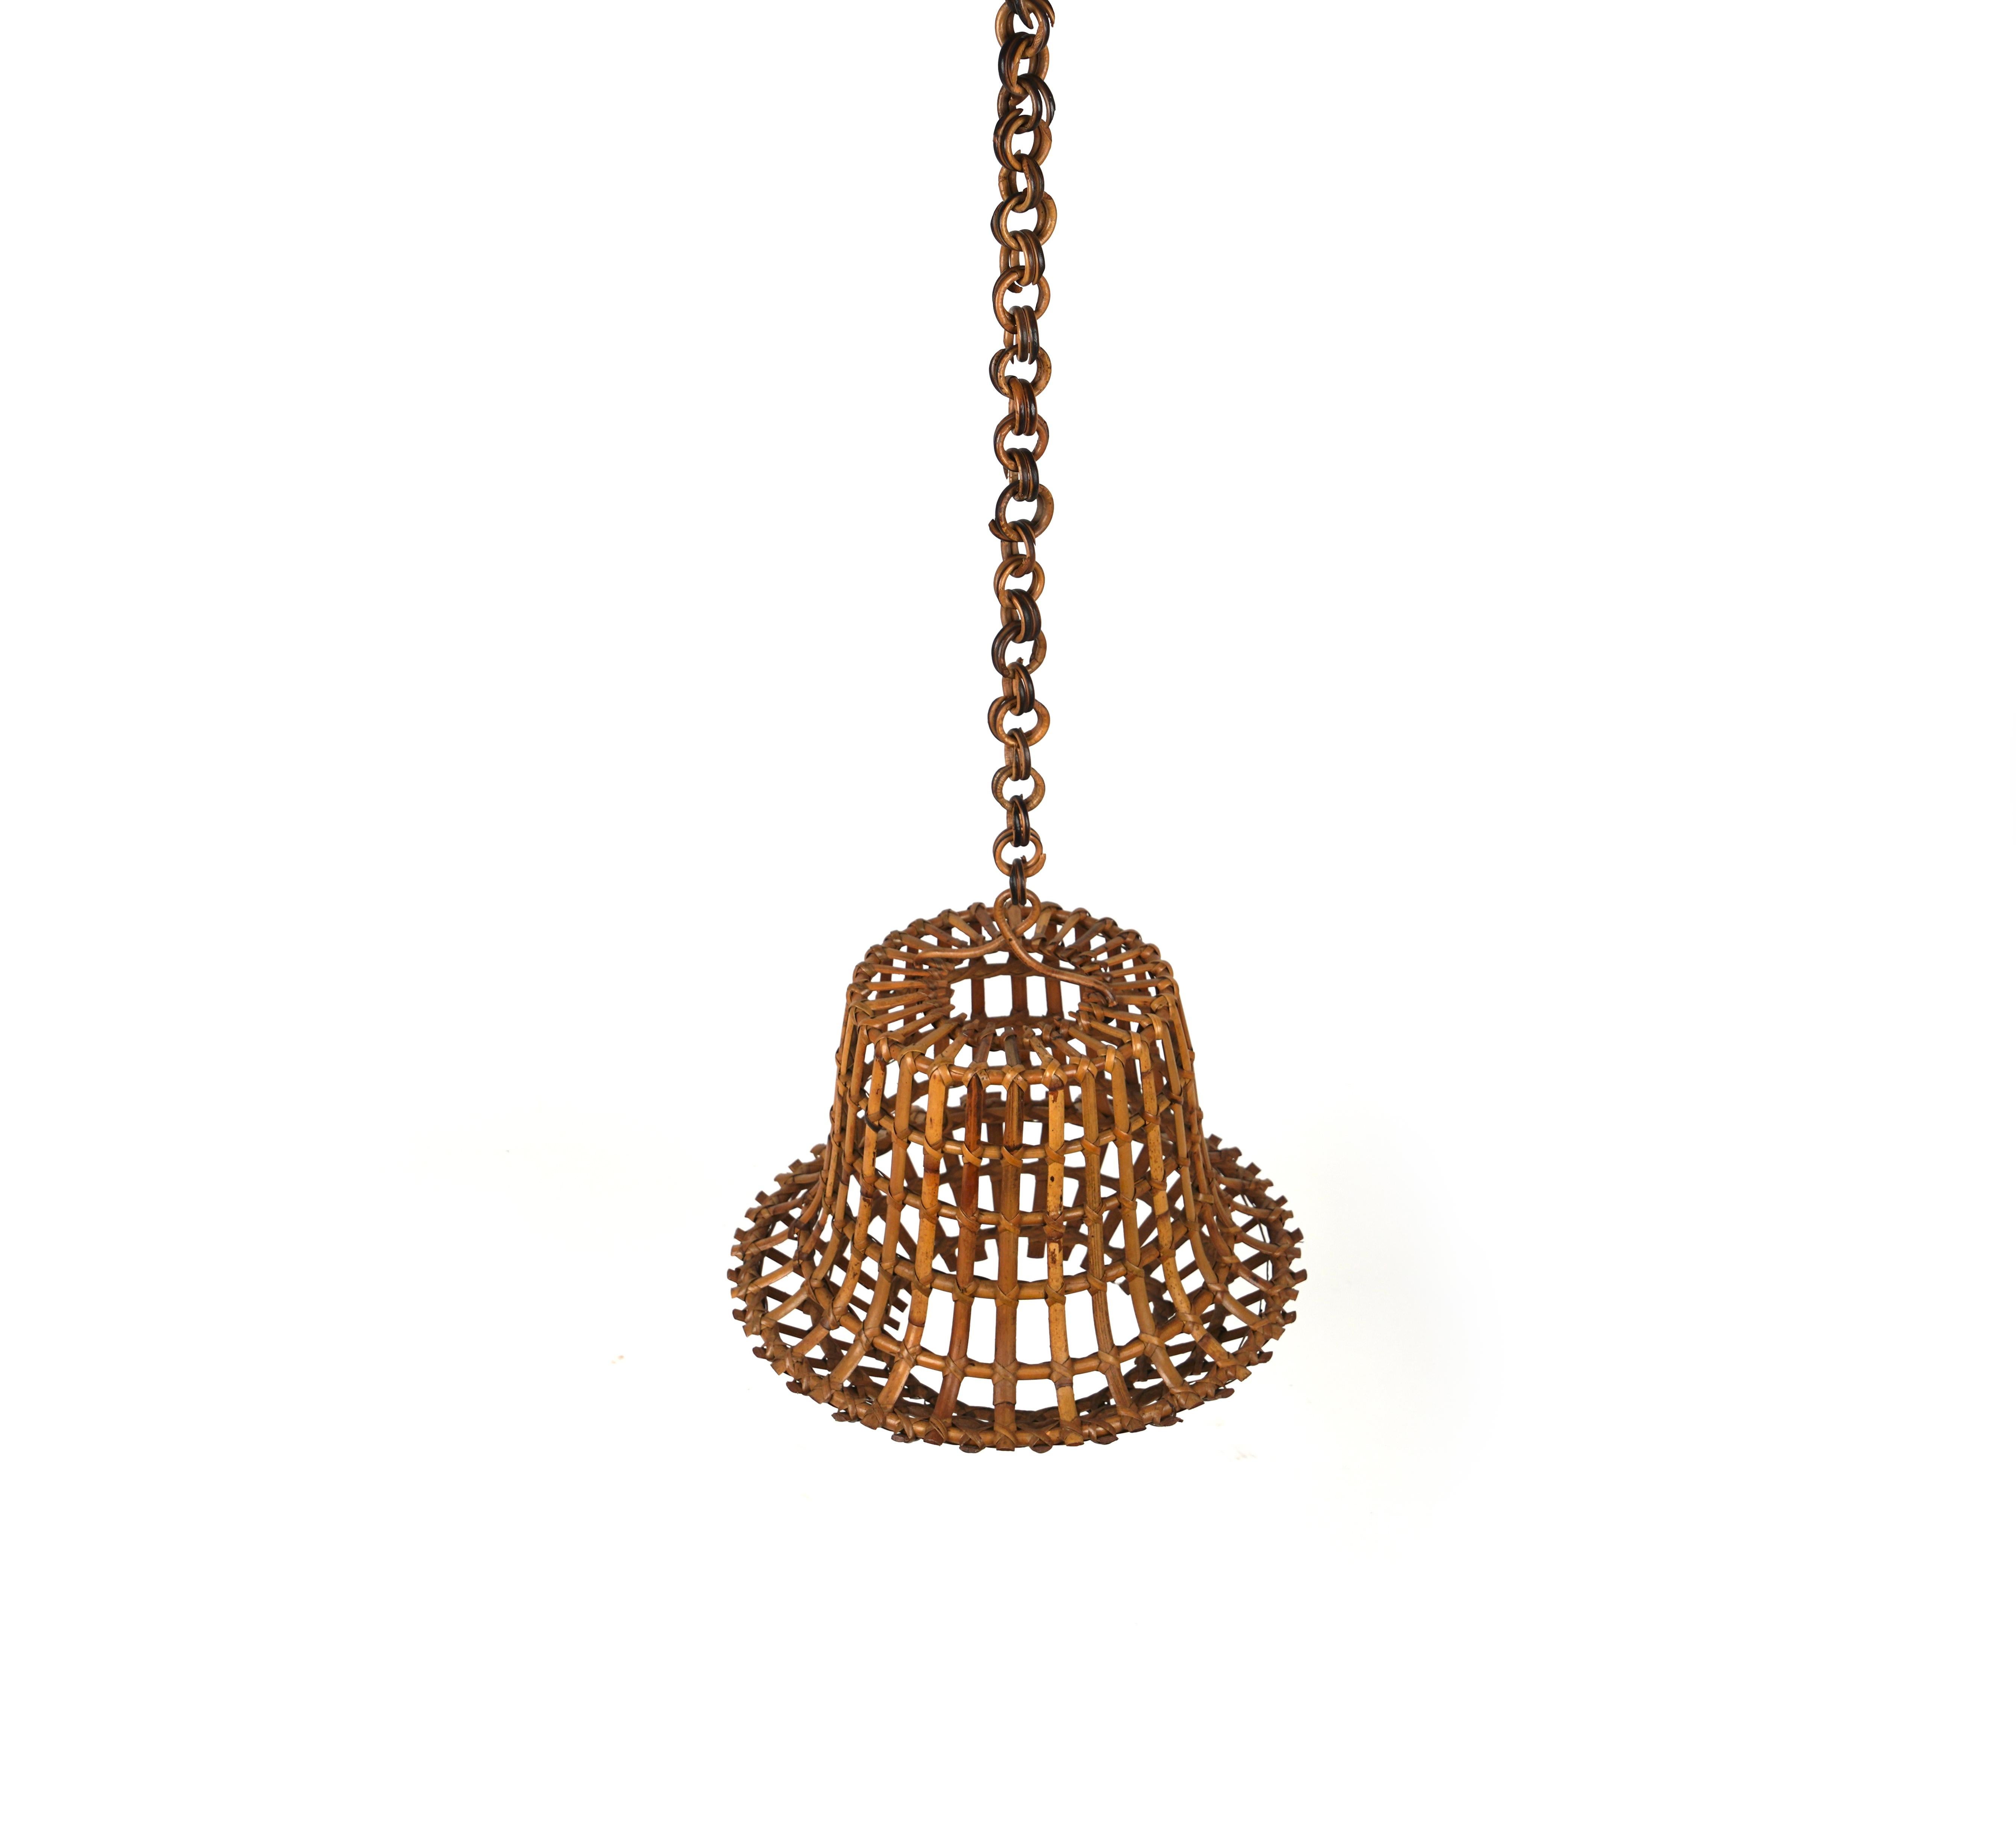 Midcentury Bamboo and Rattan Chandelier Louis Sognot Style, Italy 1960s For Sale 2